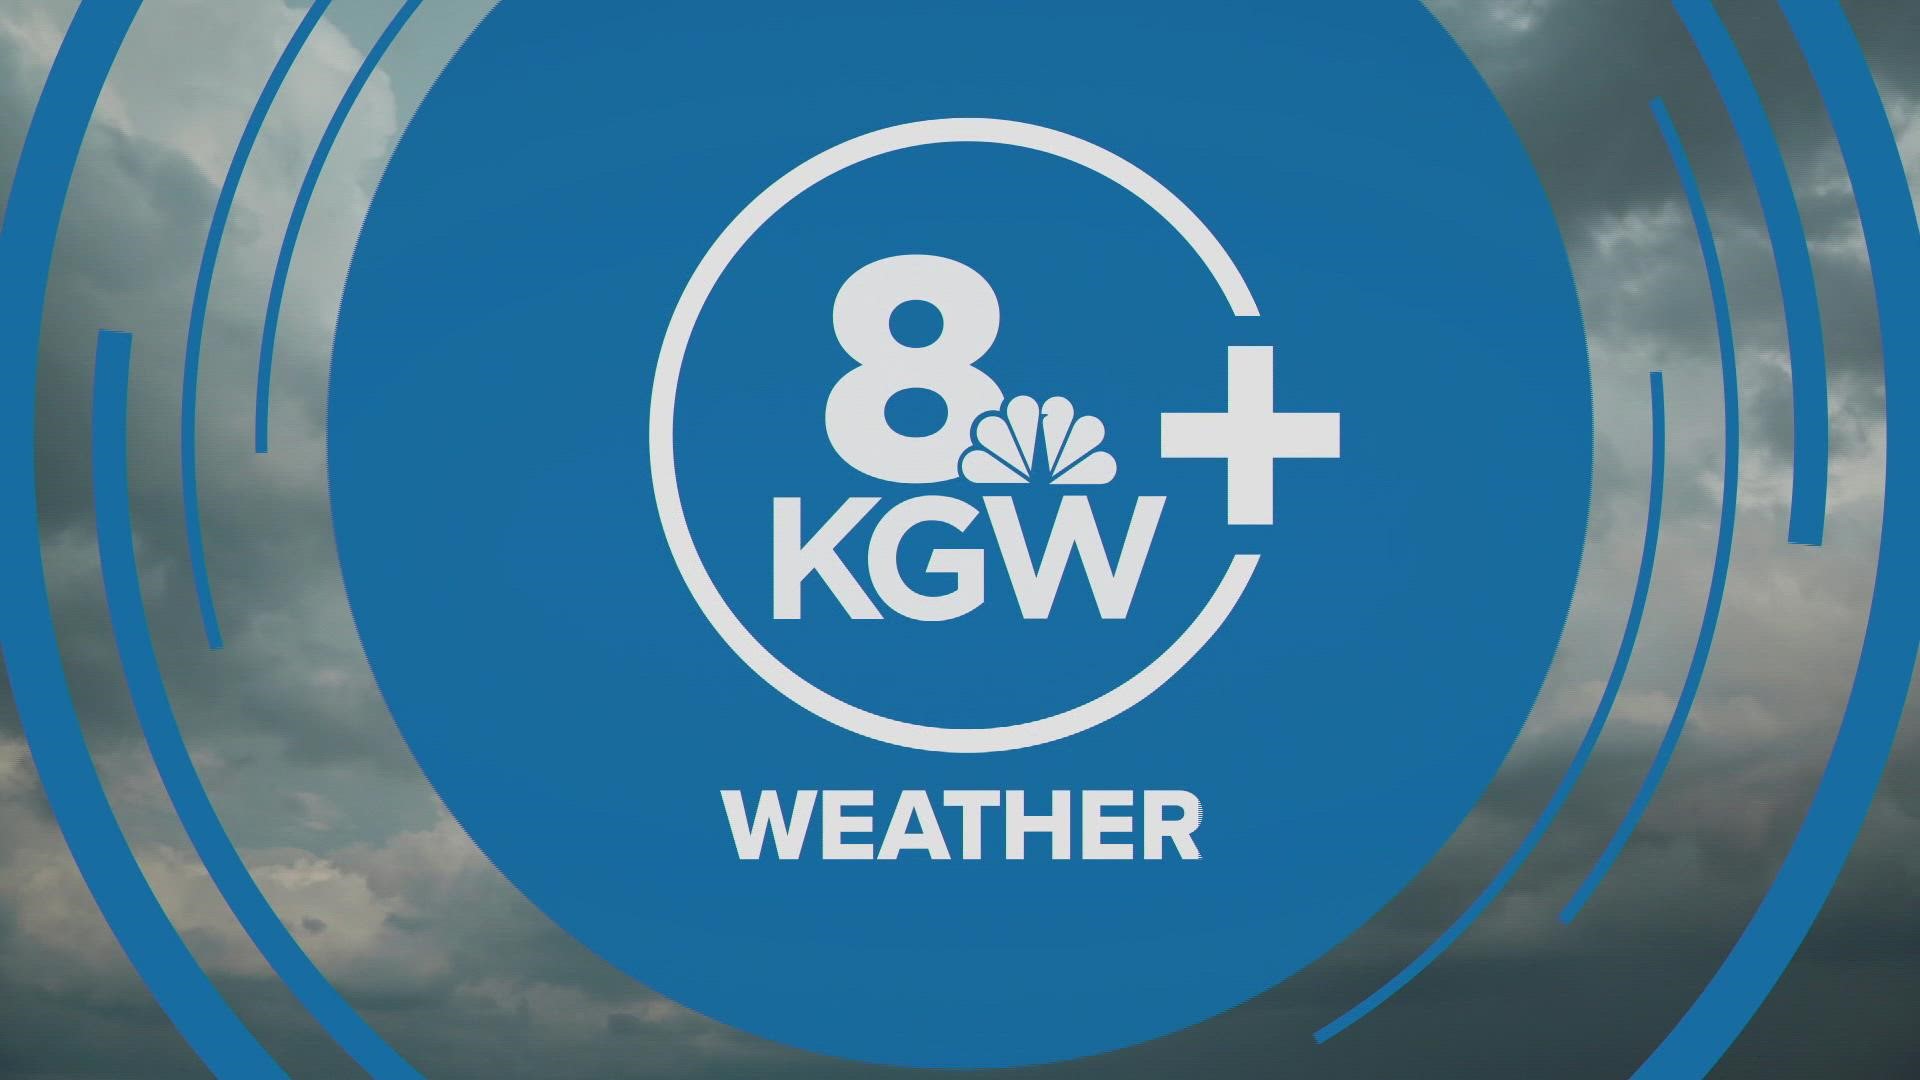 KGW meteorologist Rod Hill has the KGW+ Weather report for Wednesday, Jan. 25, 2023.